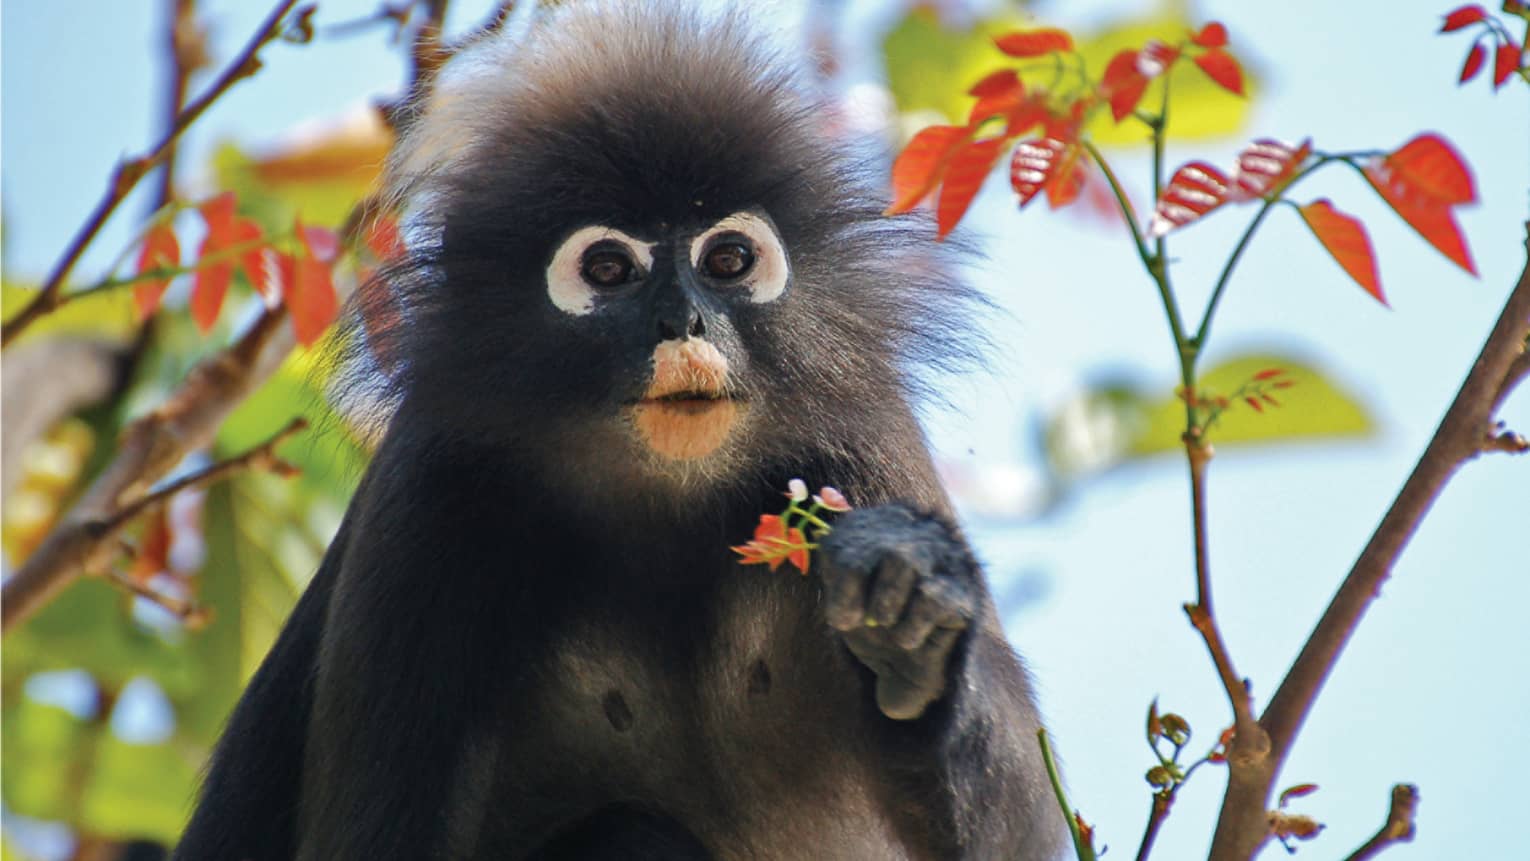 Close-up of dusty leaf monkey with wide eyes, frizzy hair around face